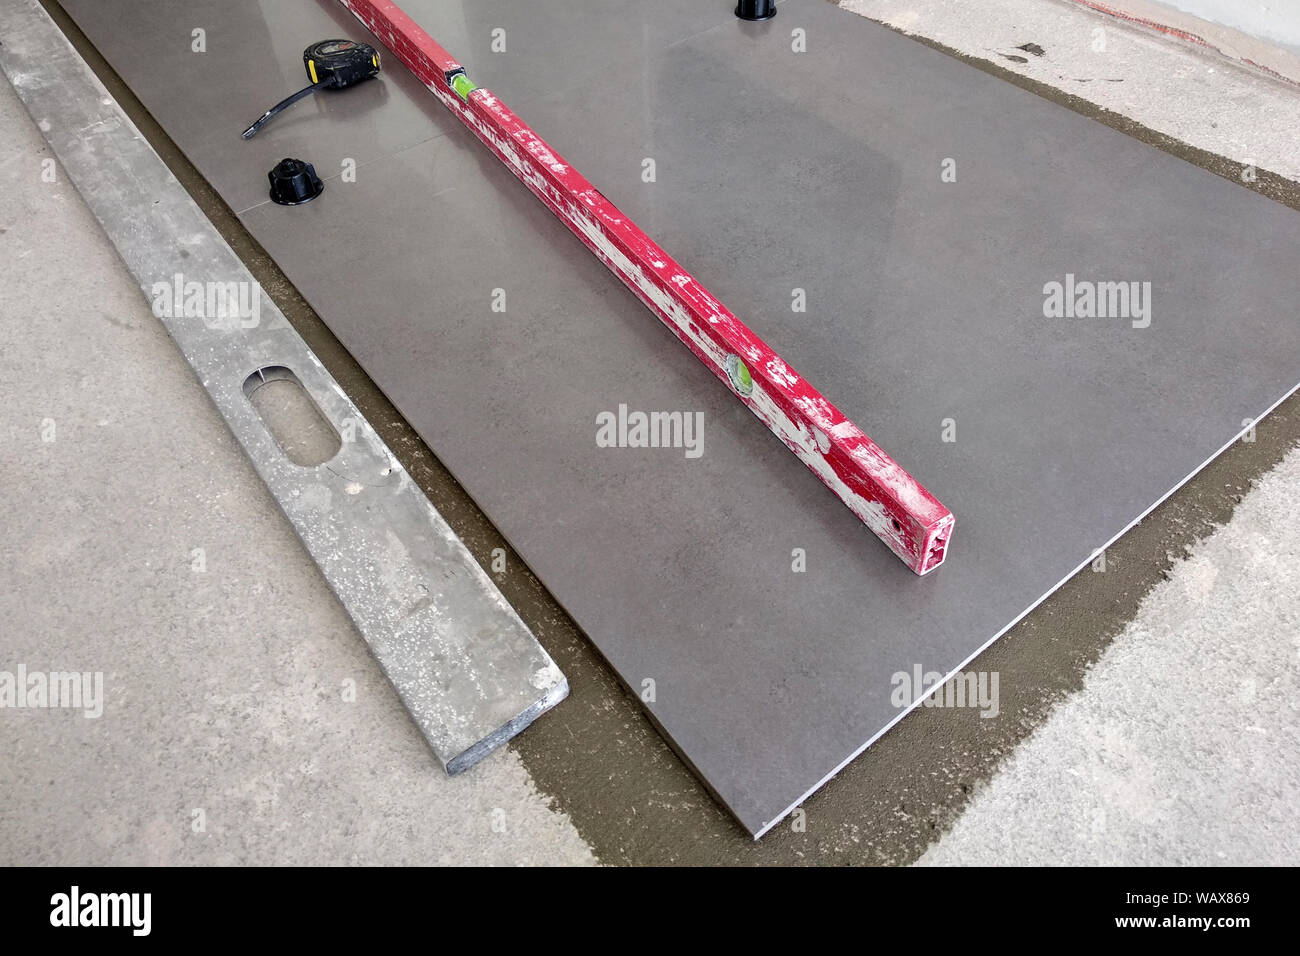 Ceramic Tiles And Tools For Tiler Floor Tiles Installation Home